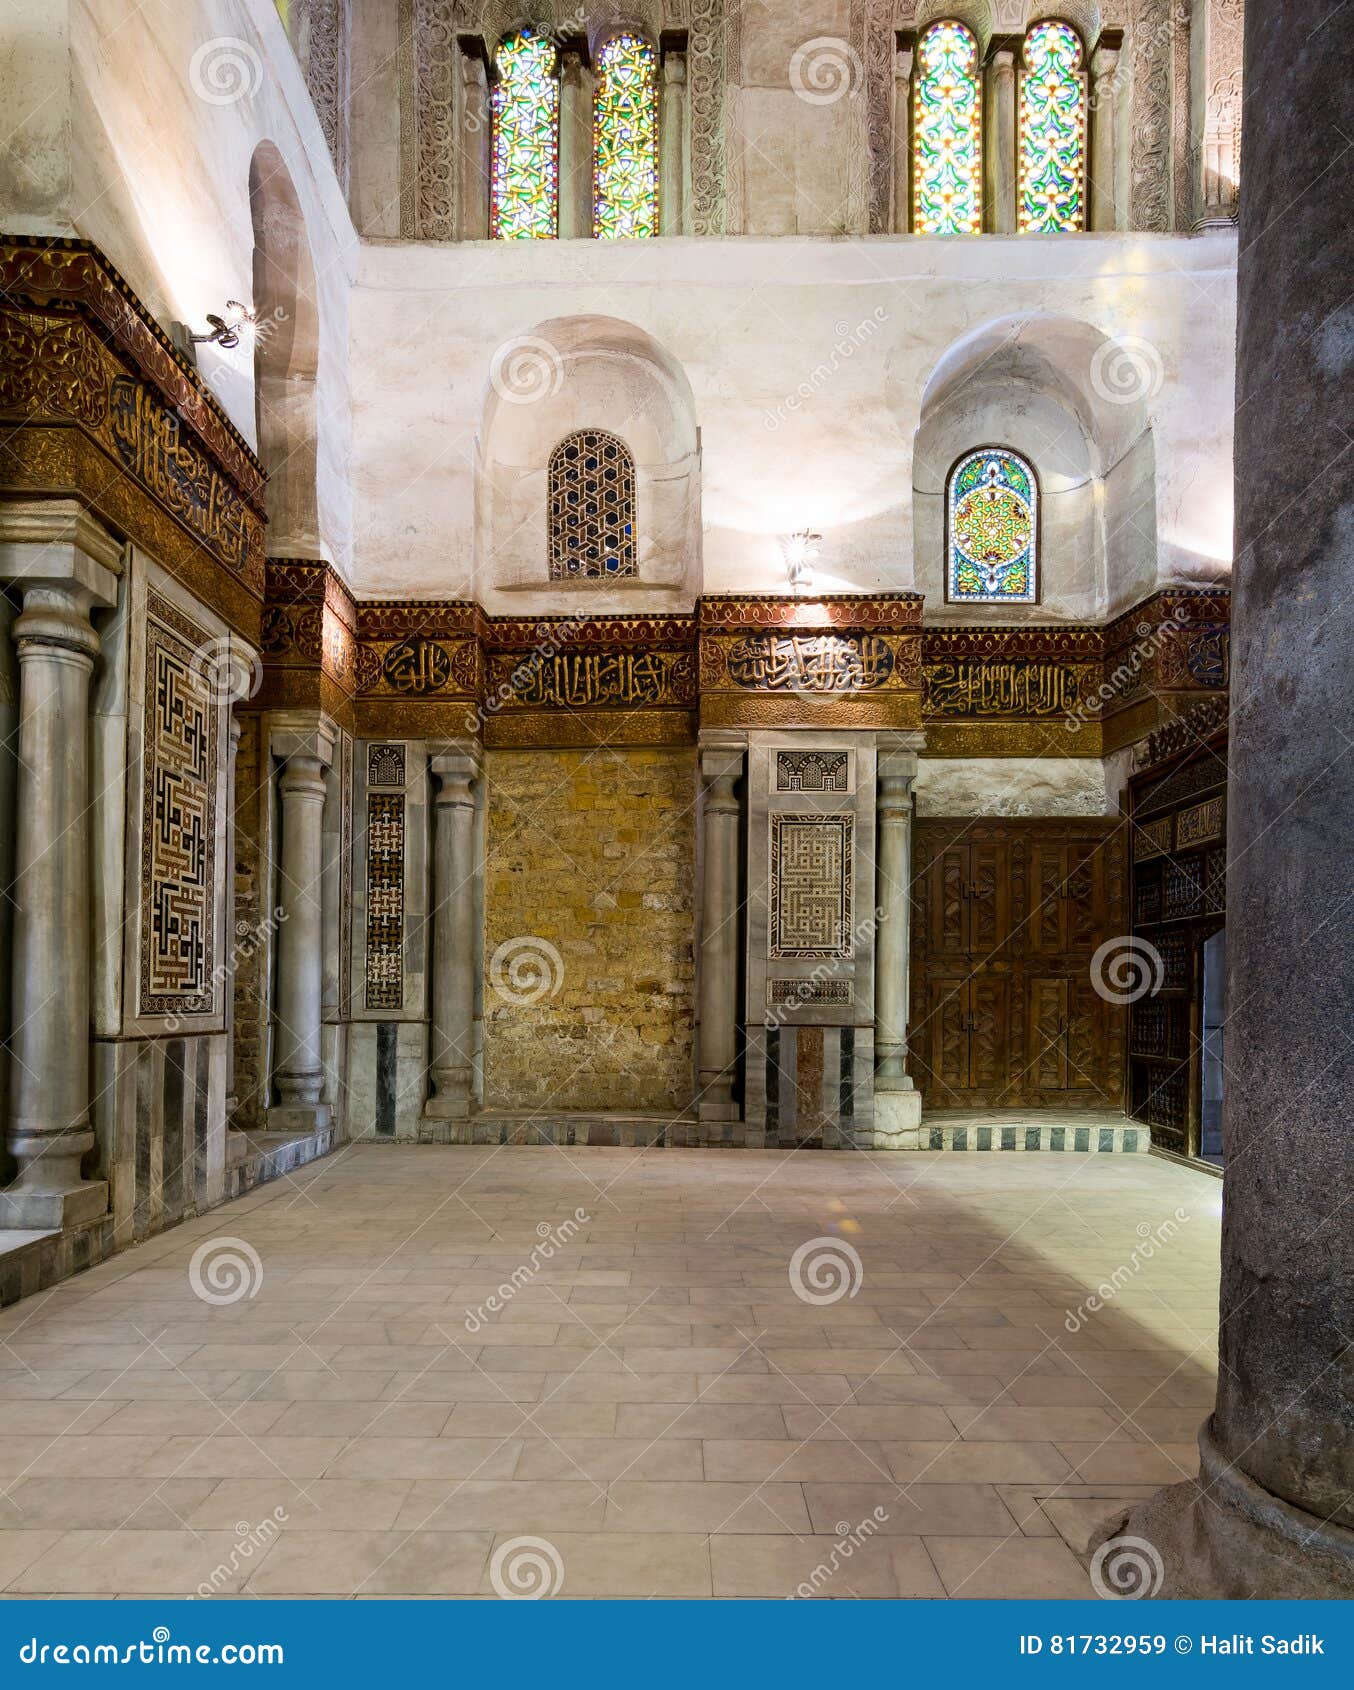 interior of the mausoleum of sultan qalawun, old cairo, egypt